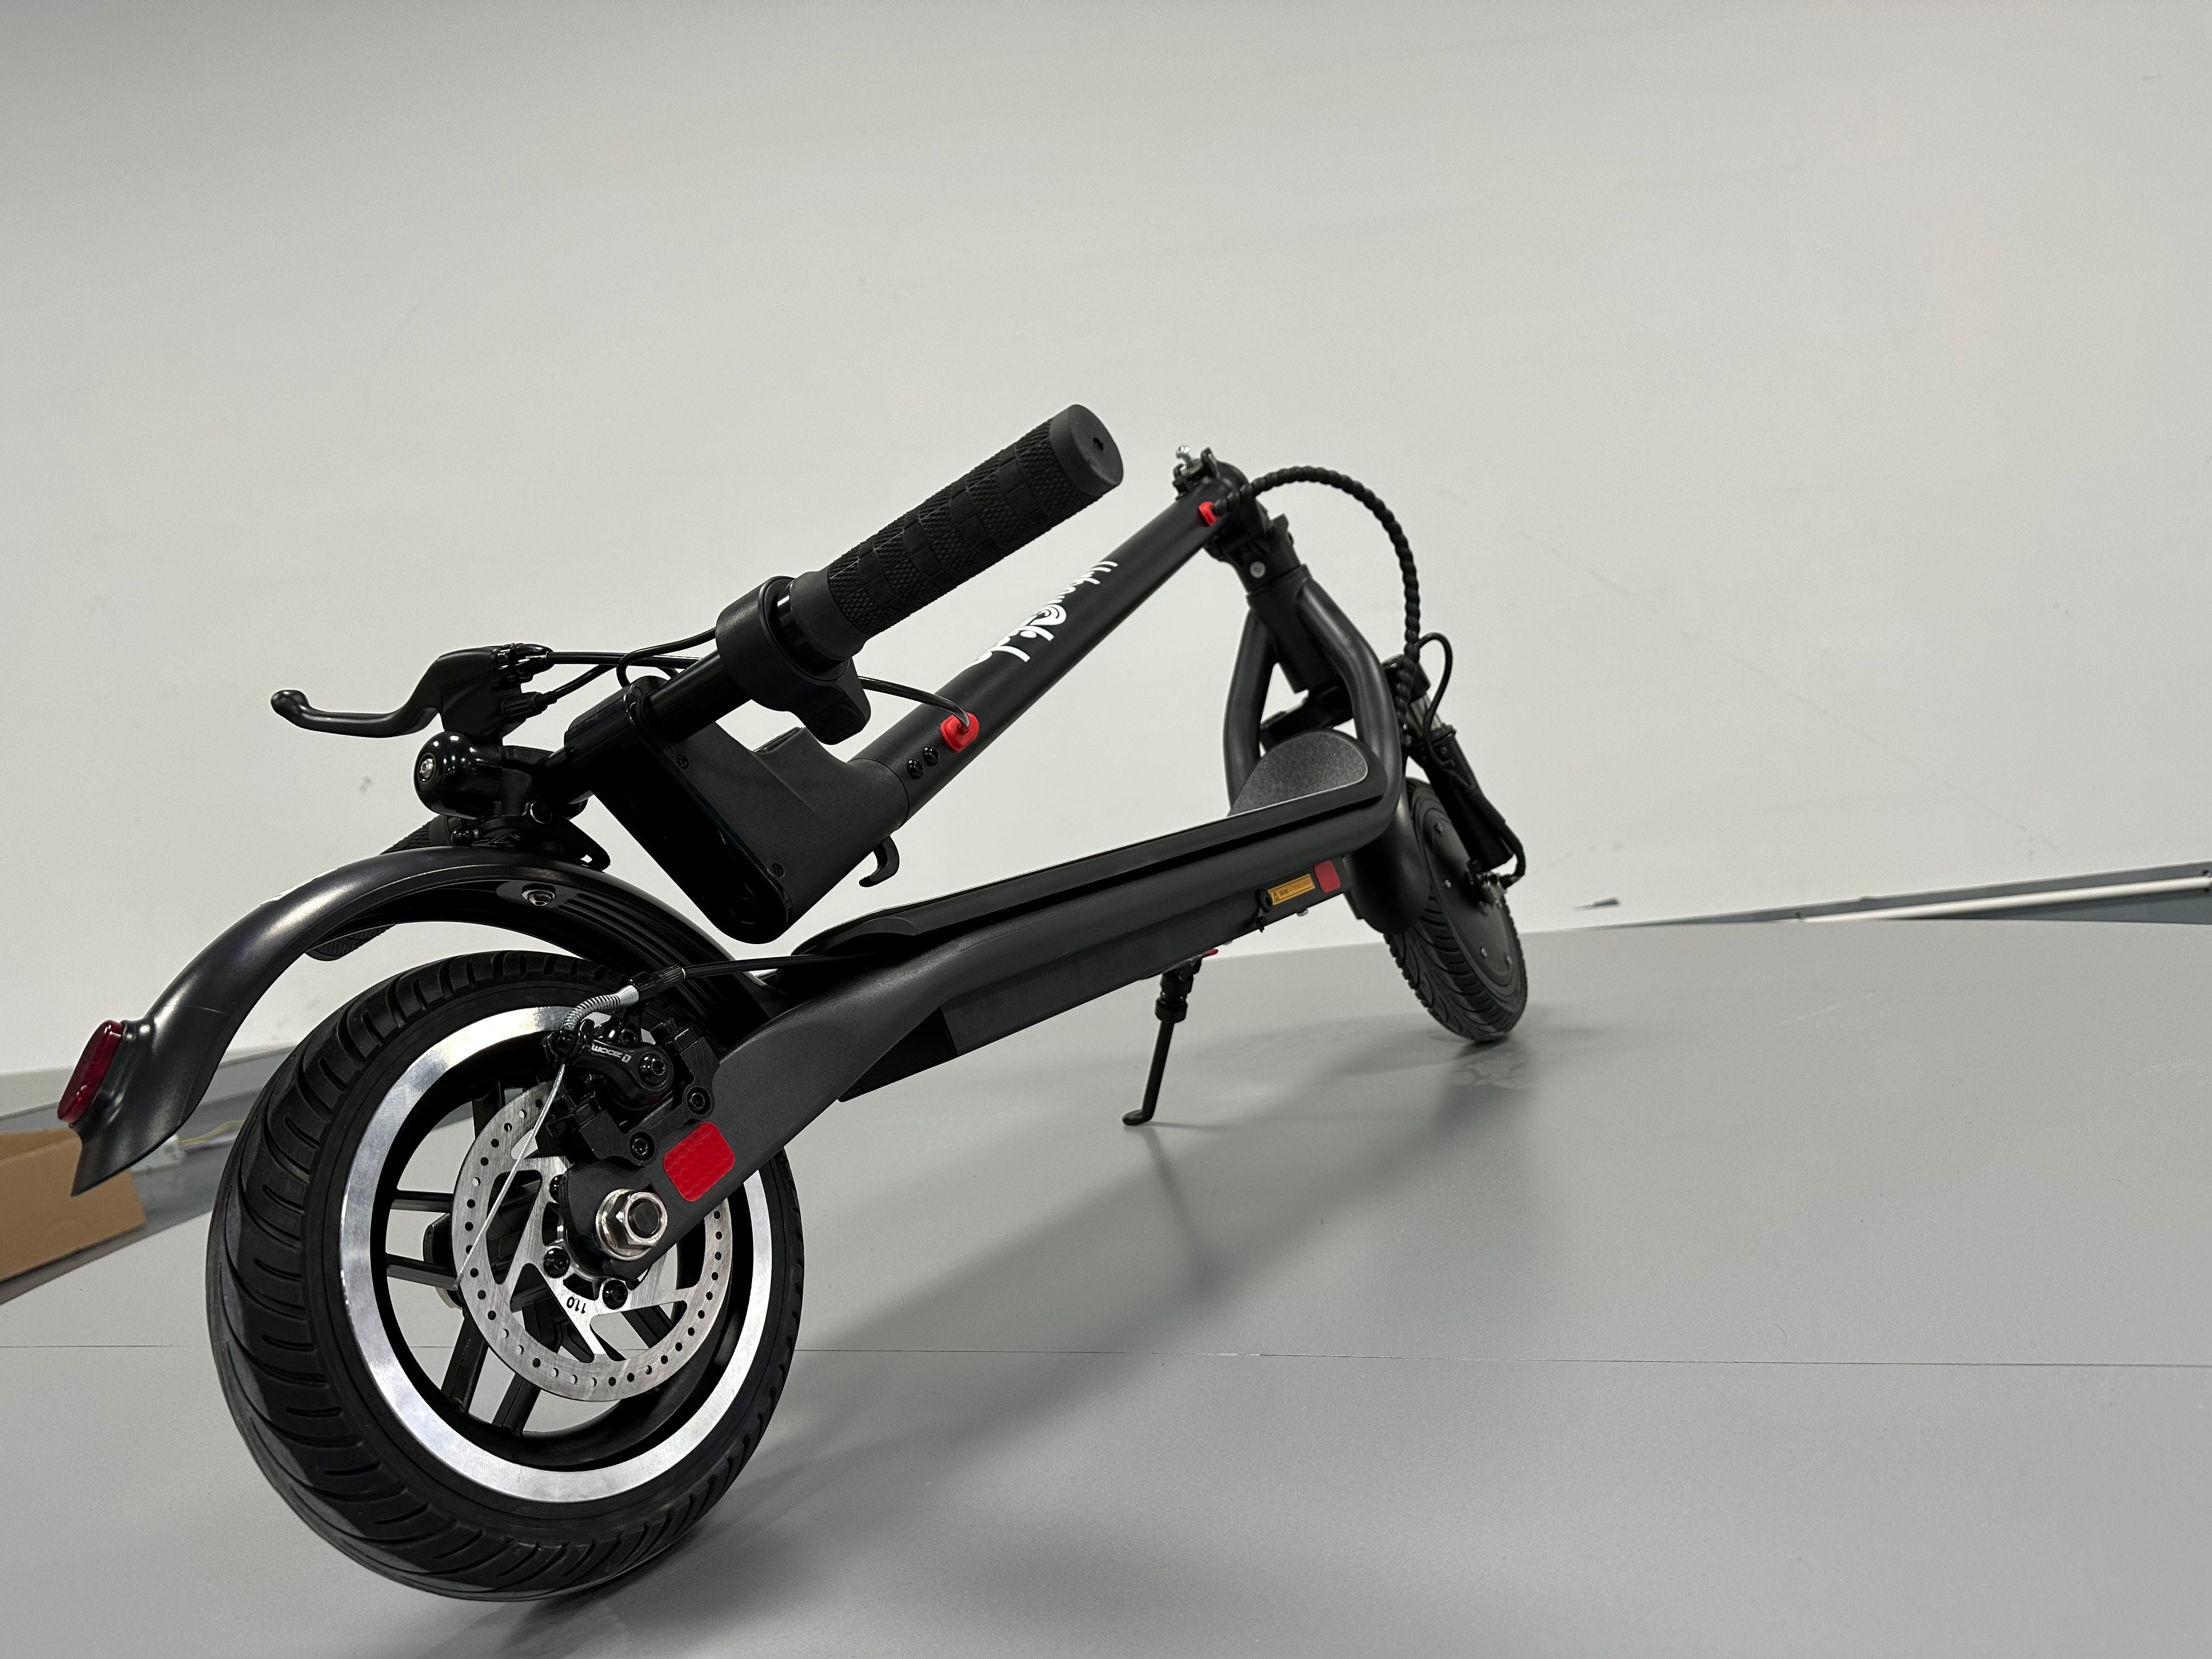 SGX6 Electric scooter - Commuter 350W brushless motor.